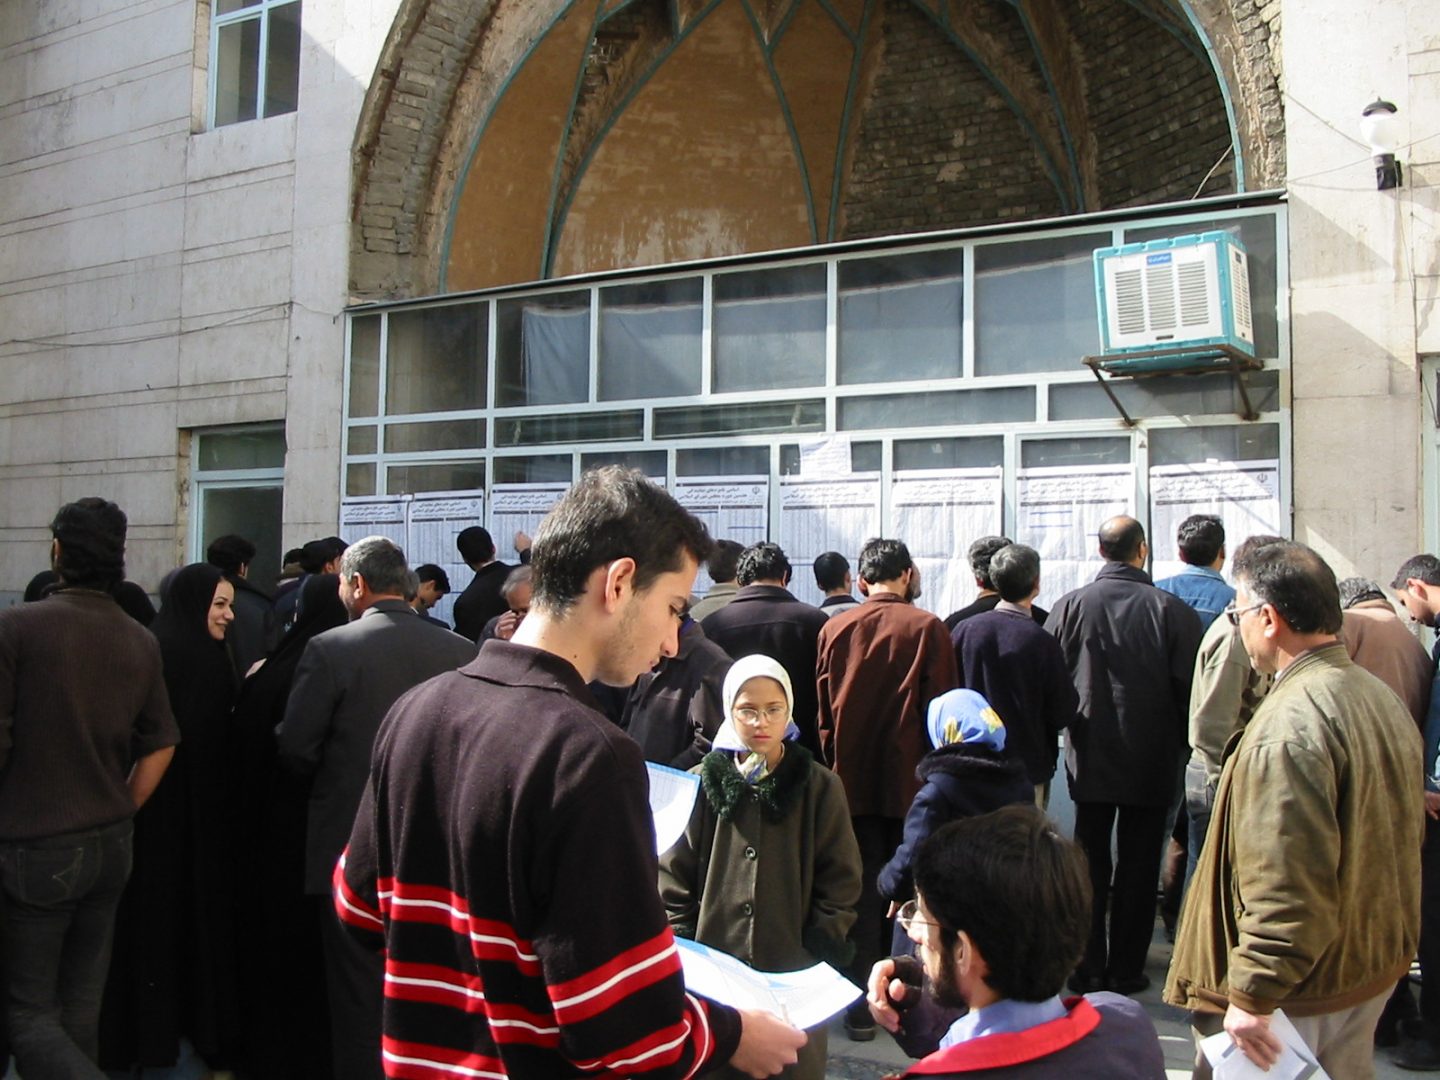 In Iran, secret house churches are often raided, leading to arrests and long prison sentences. Photo by RNW.org on Flickr.